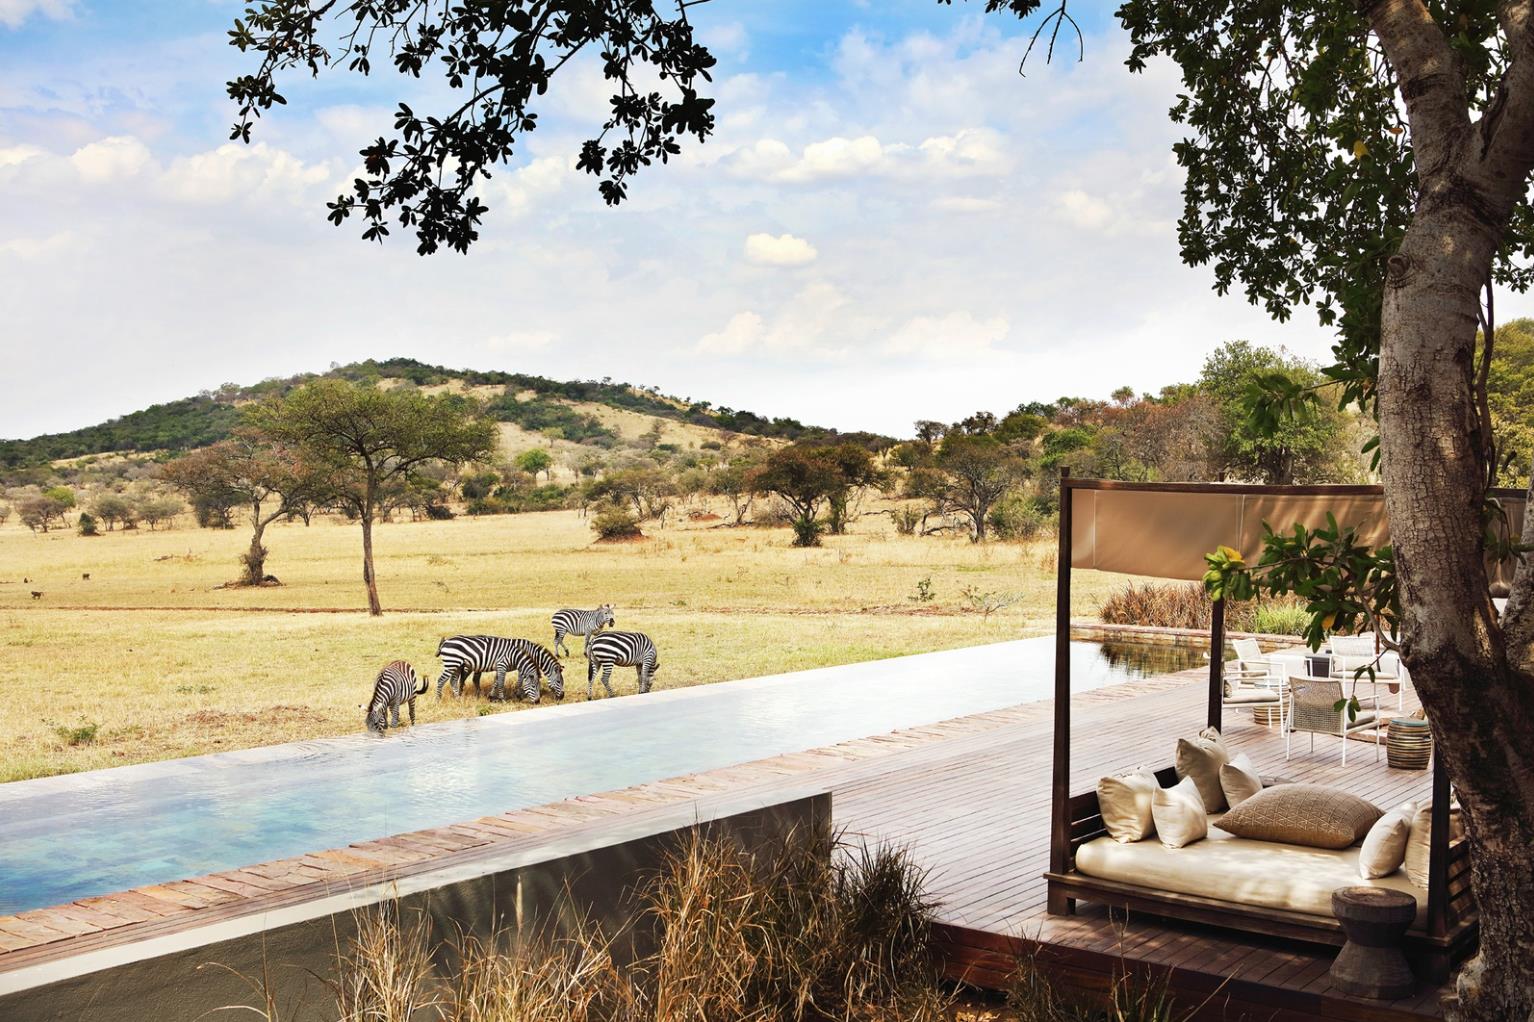 9 Perfect Properties for a Multigenerational Safari, Relax by the infinity pool at Singita Serengeti as the wildlife approaches. ©Singita Serengeti